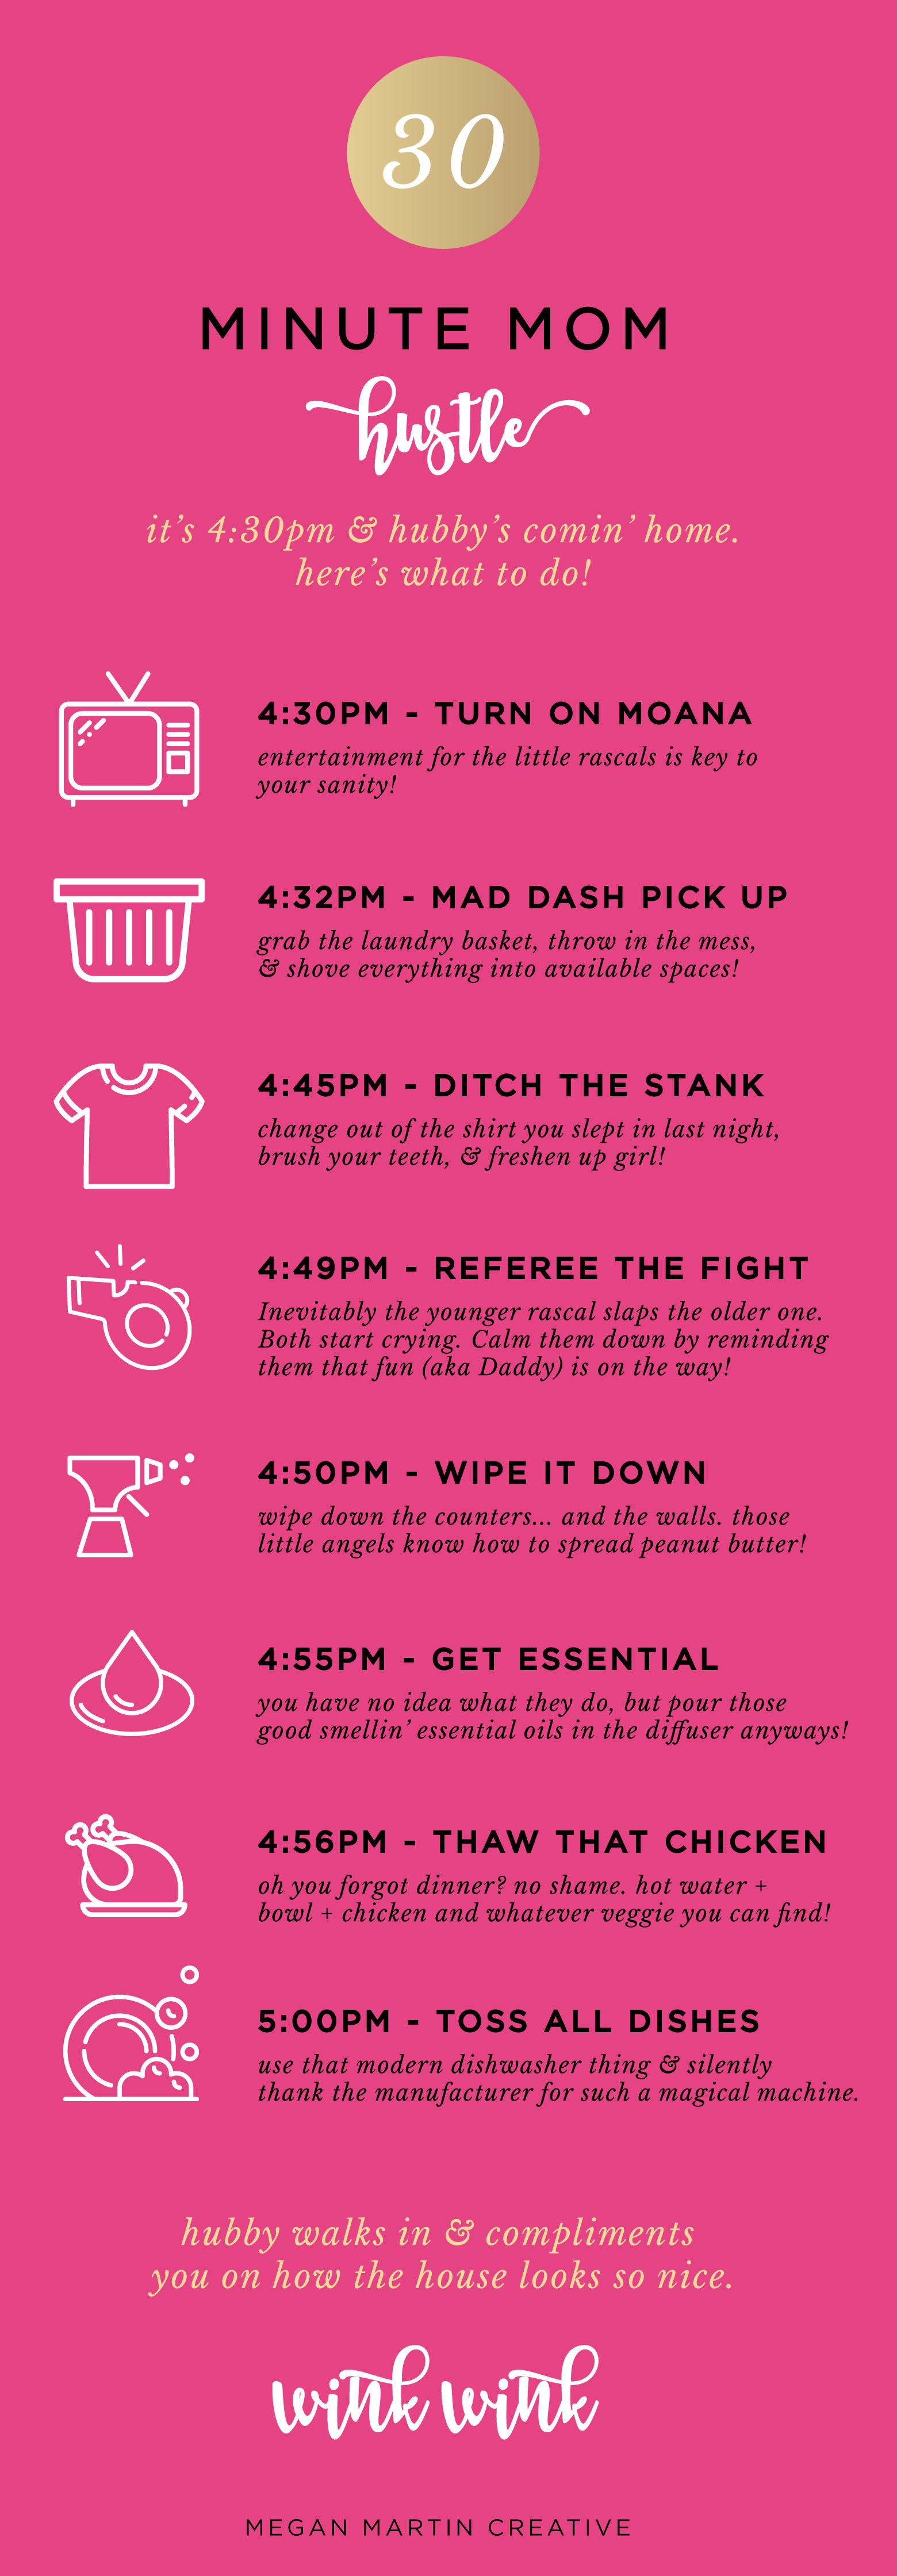 The Every Mom's Guide to 30 Minute Home Hustle before Daddy Arrives!